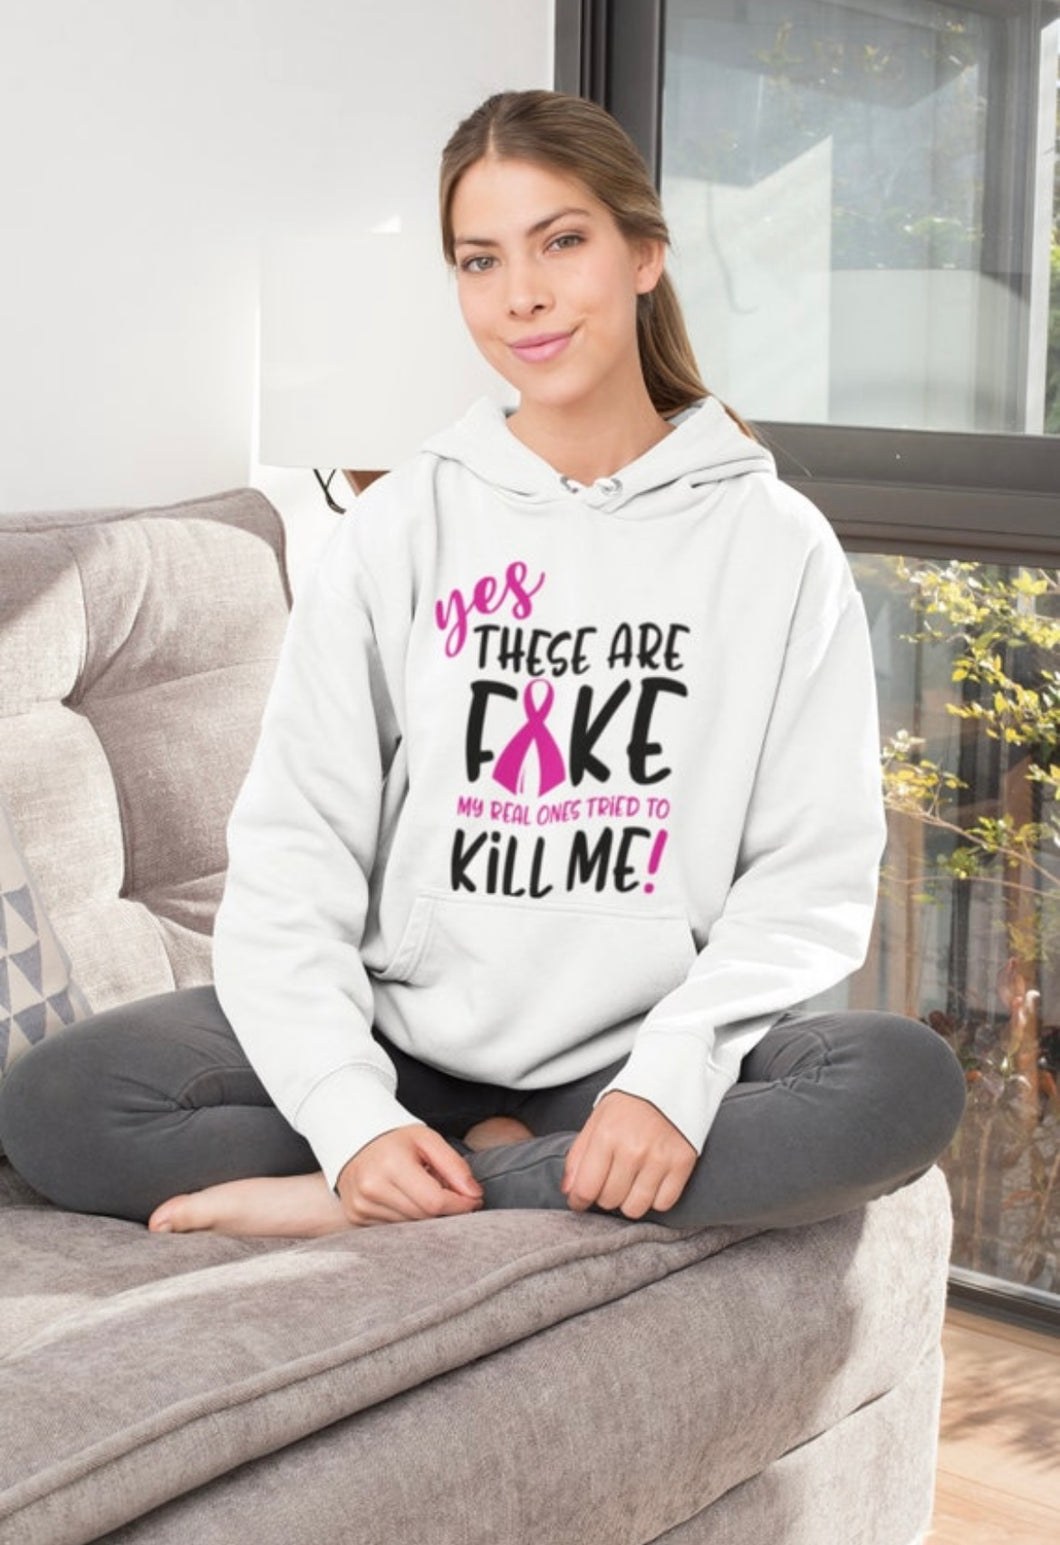 These are Fake, My Real Ones tried to Kill Me Sweatshirt